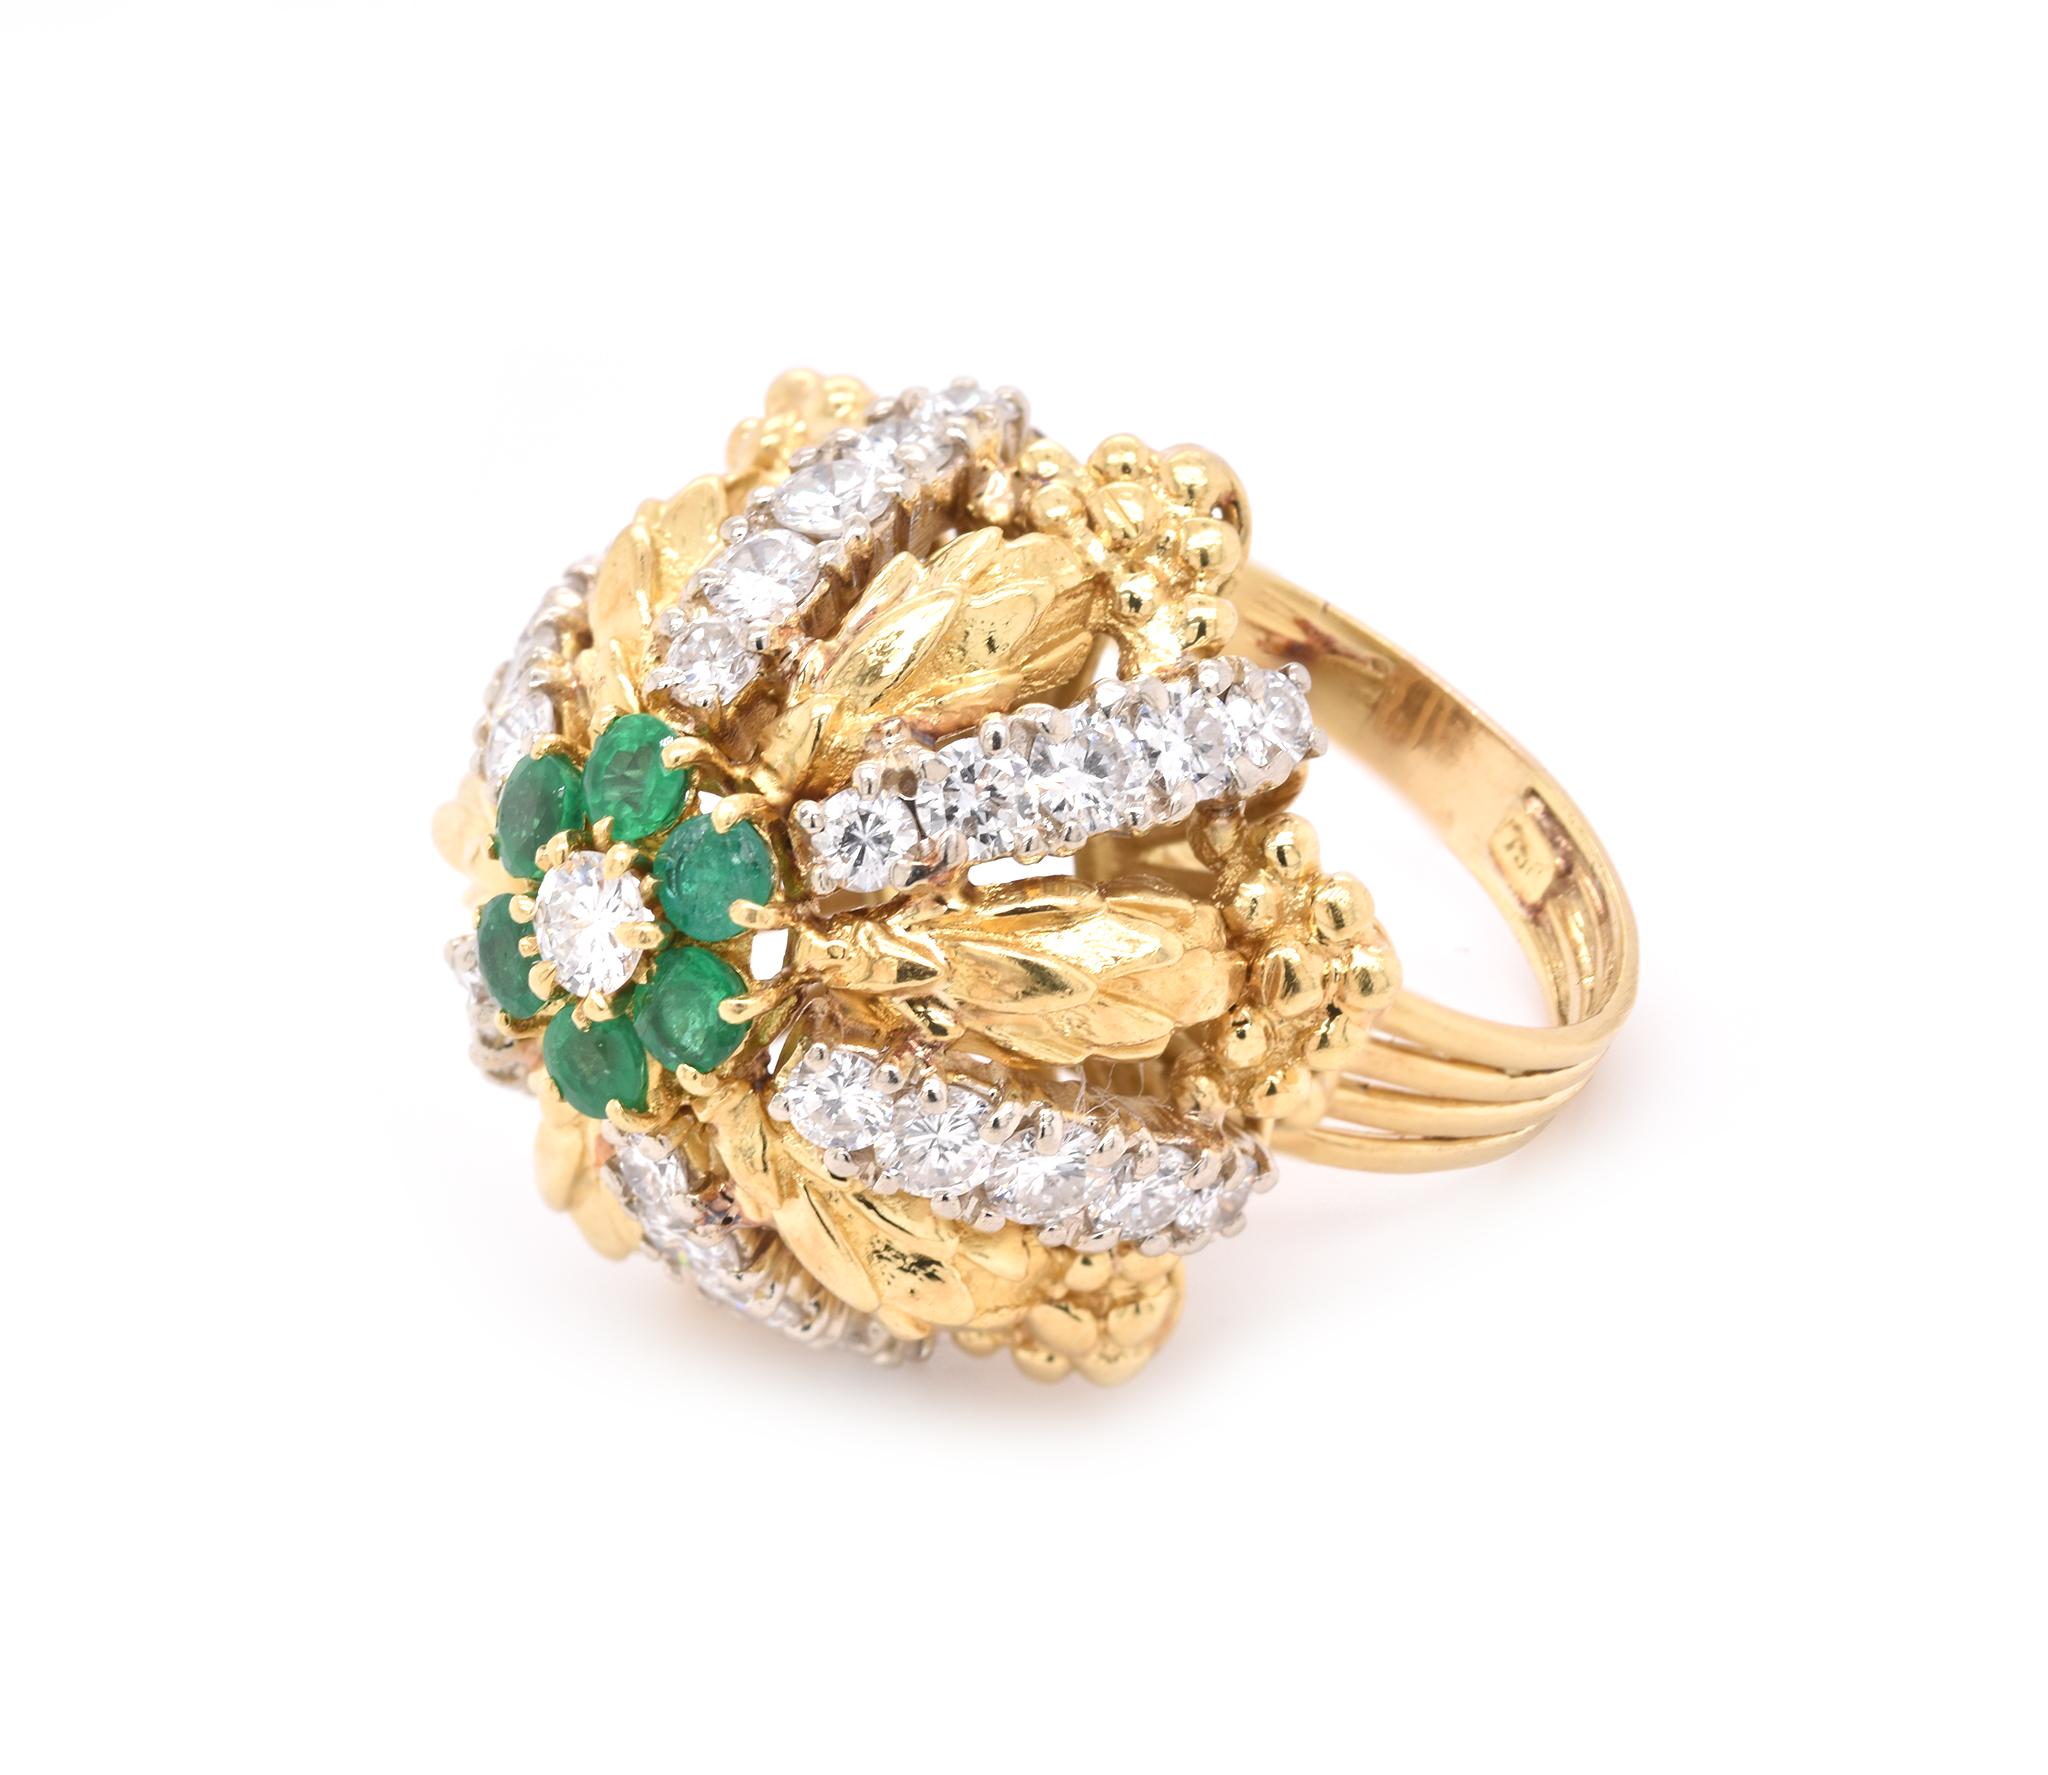 Designer: custom
Material: 18K yellow gold
Diamond: 31 round brilliant cut = 1.80cttw
Color: G
Clarity: VS2
Emerald: 6 round cut = .30ct
Ring Size: 7.5 (please allow up to 2 additional business days for sizing requests)
Dimensions: ring top measures